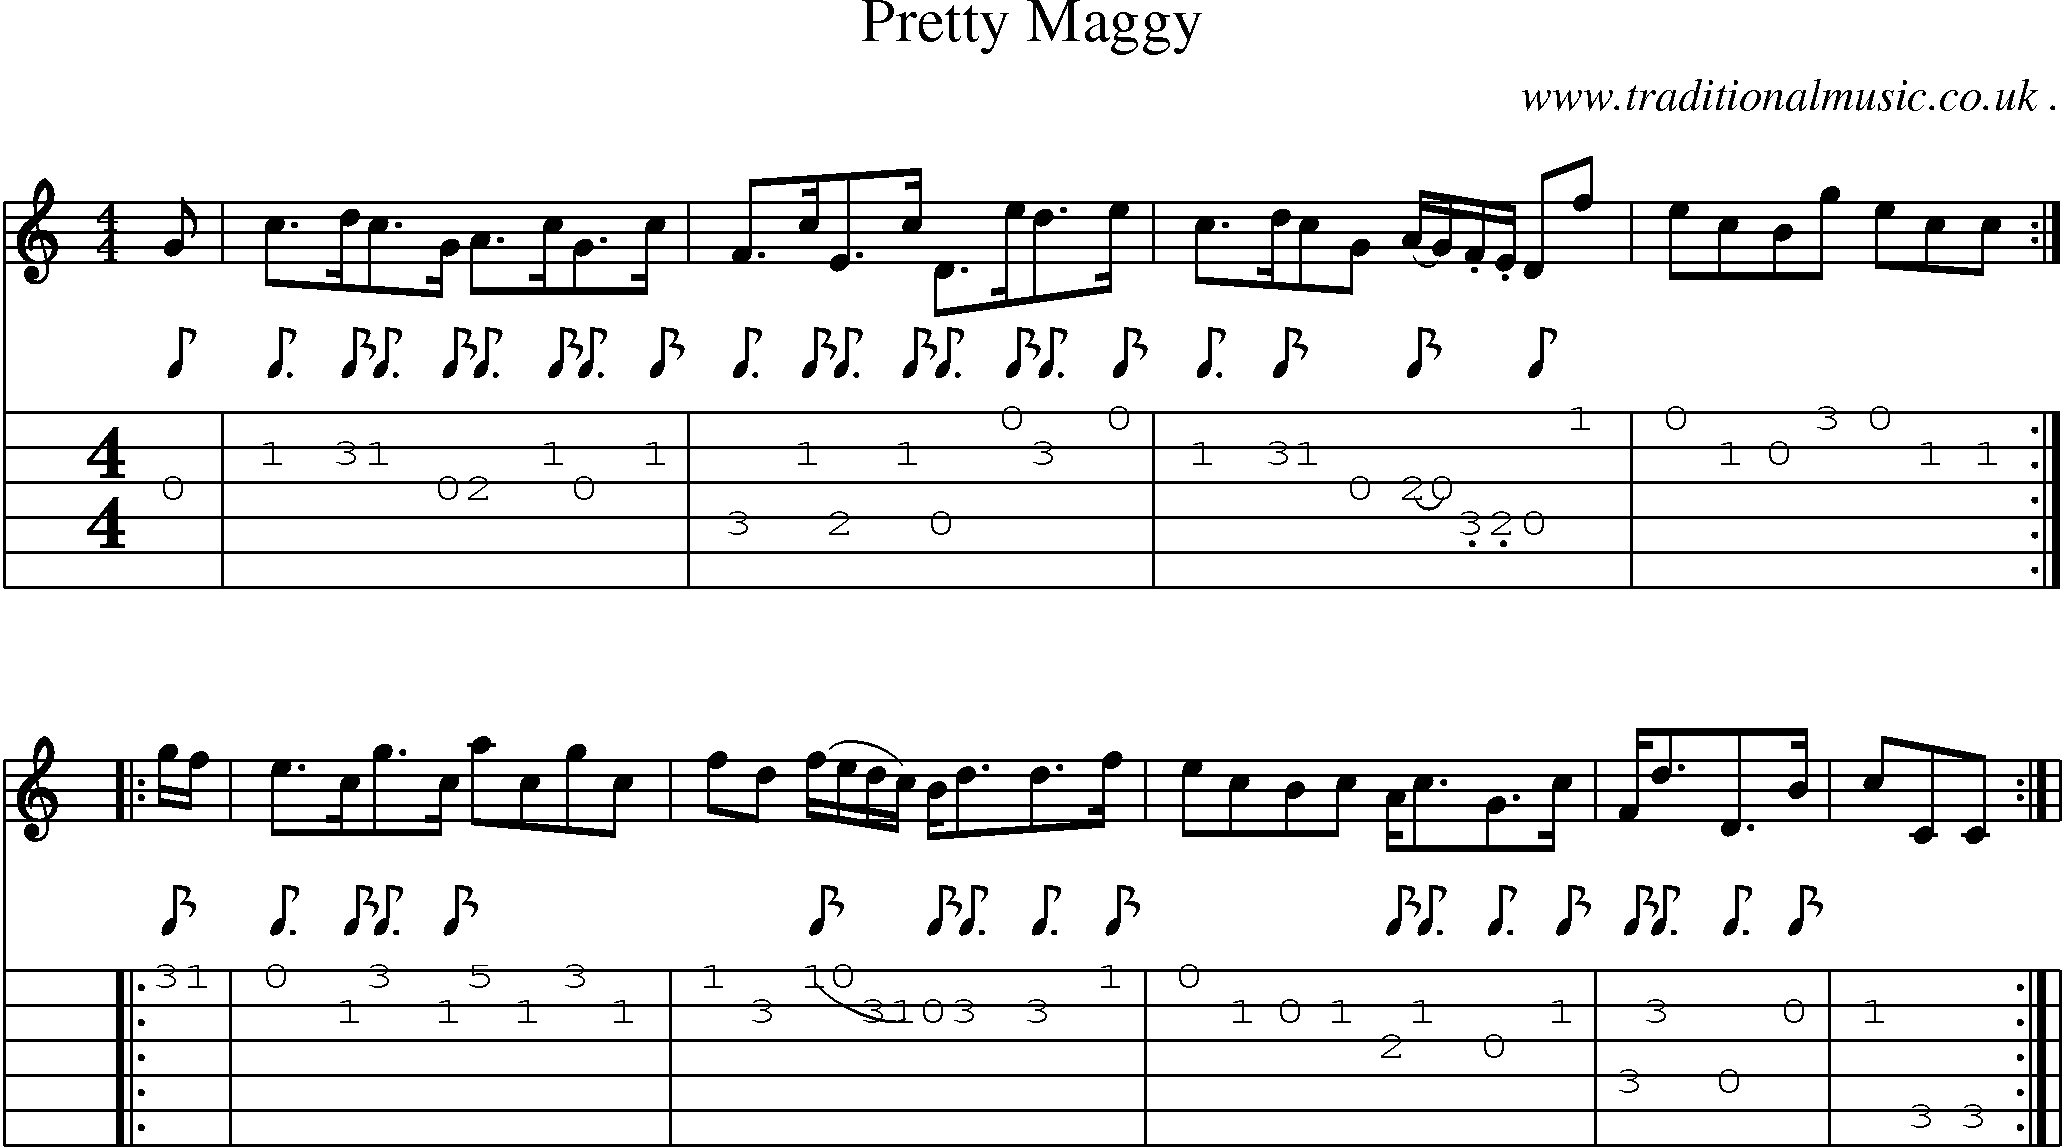 Sheet-Music and Guitar Tabs for Pretty Maggy